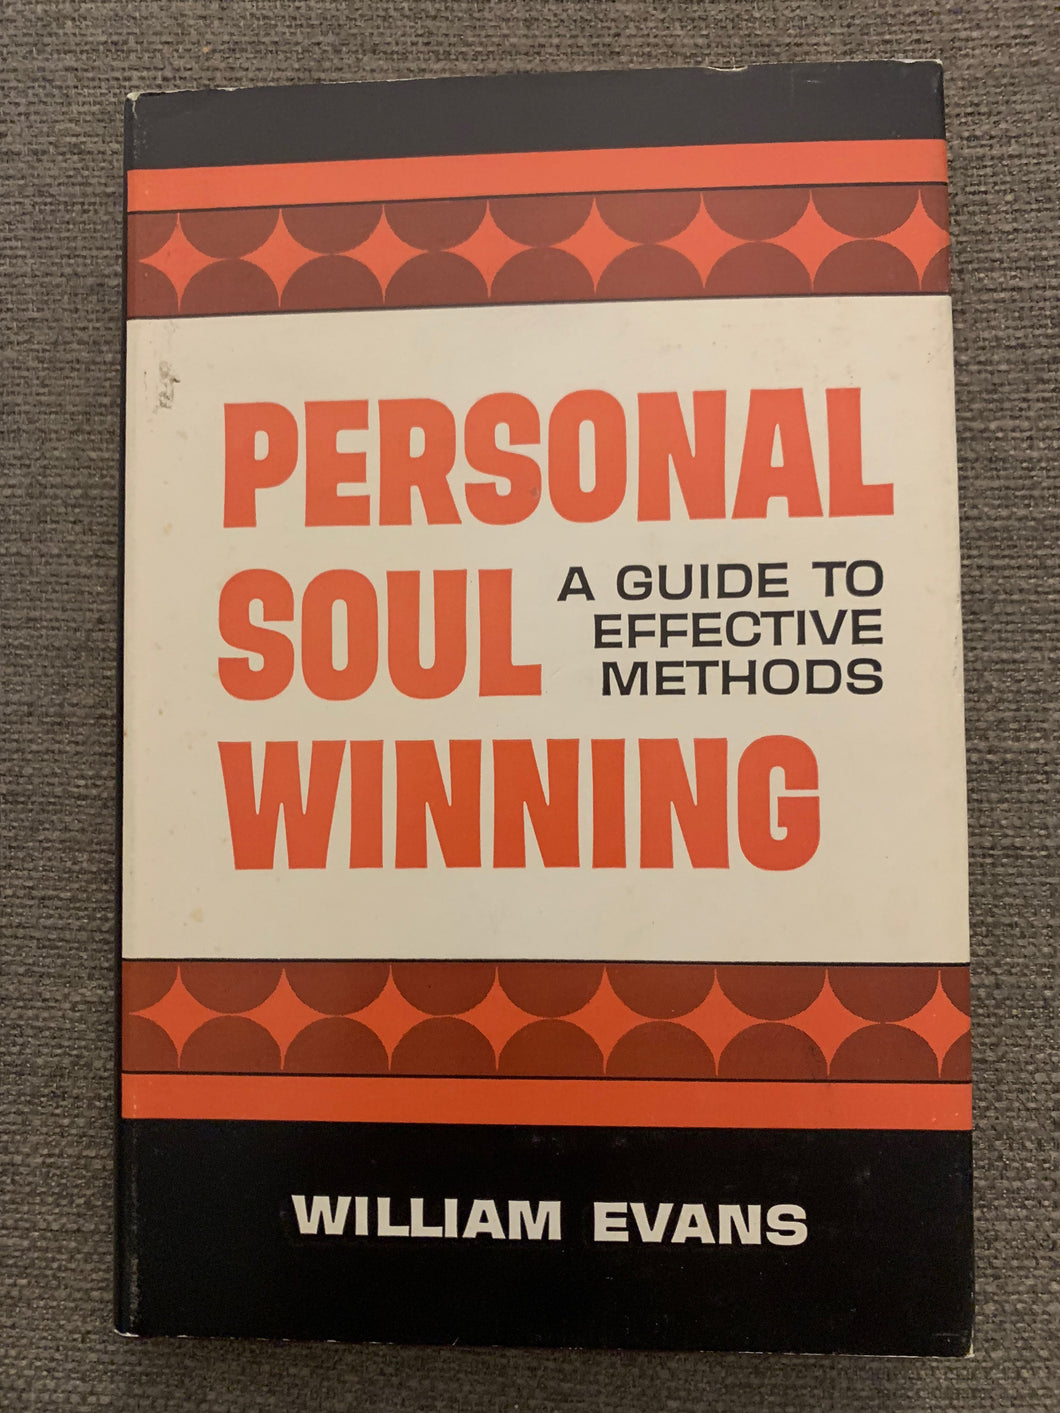 Personal Soul Winning by William Evans